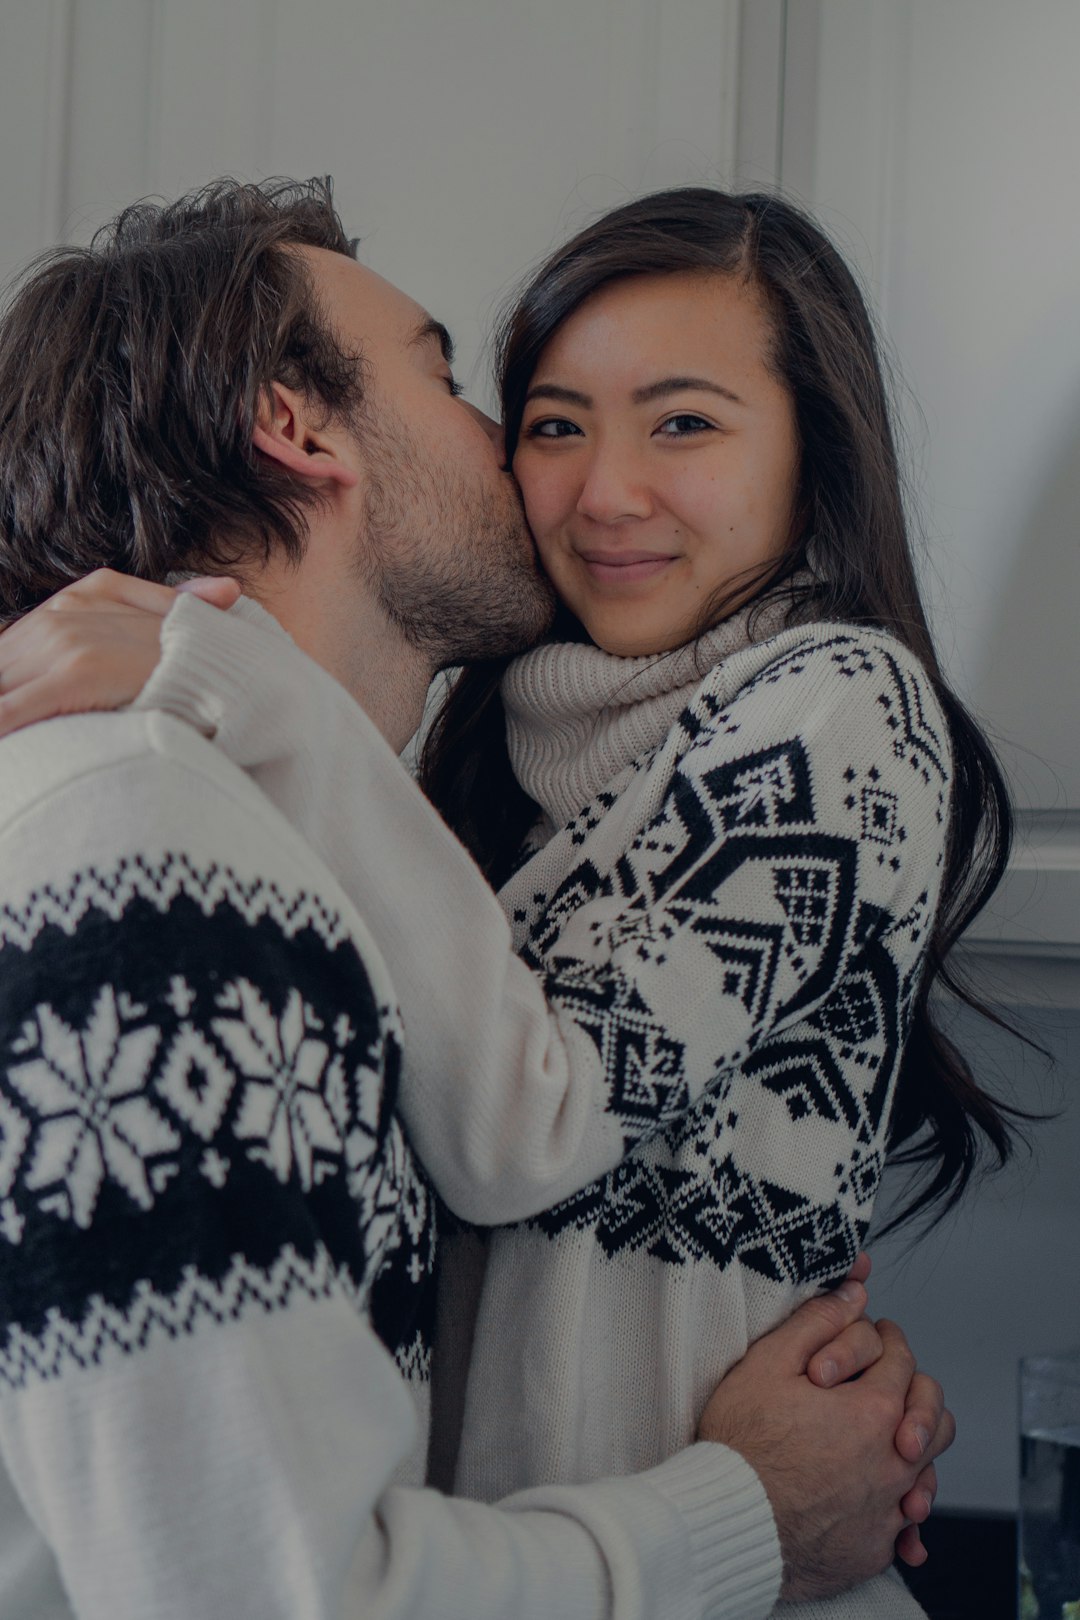 woman in black and white sweater hugging man in white shirt